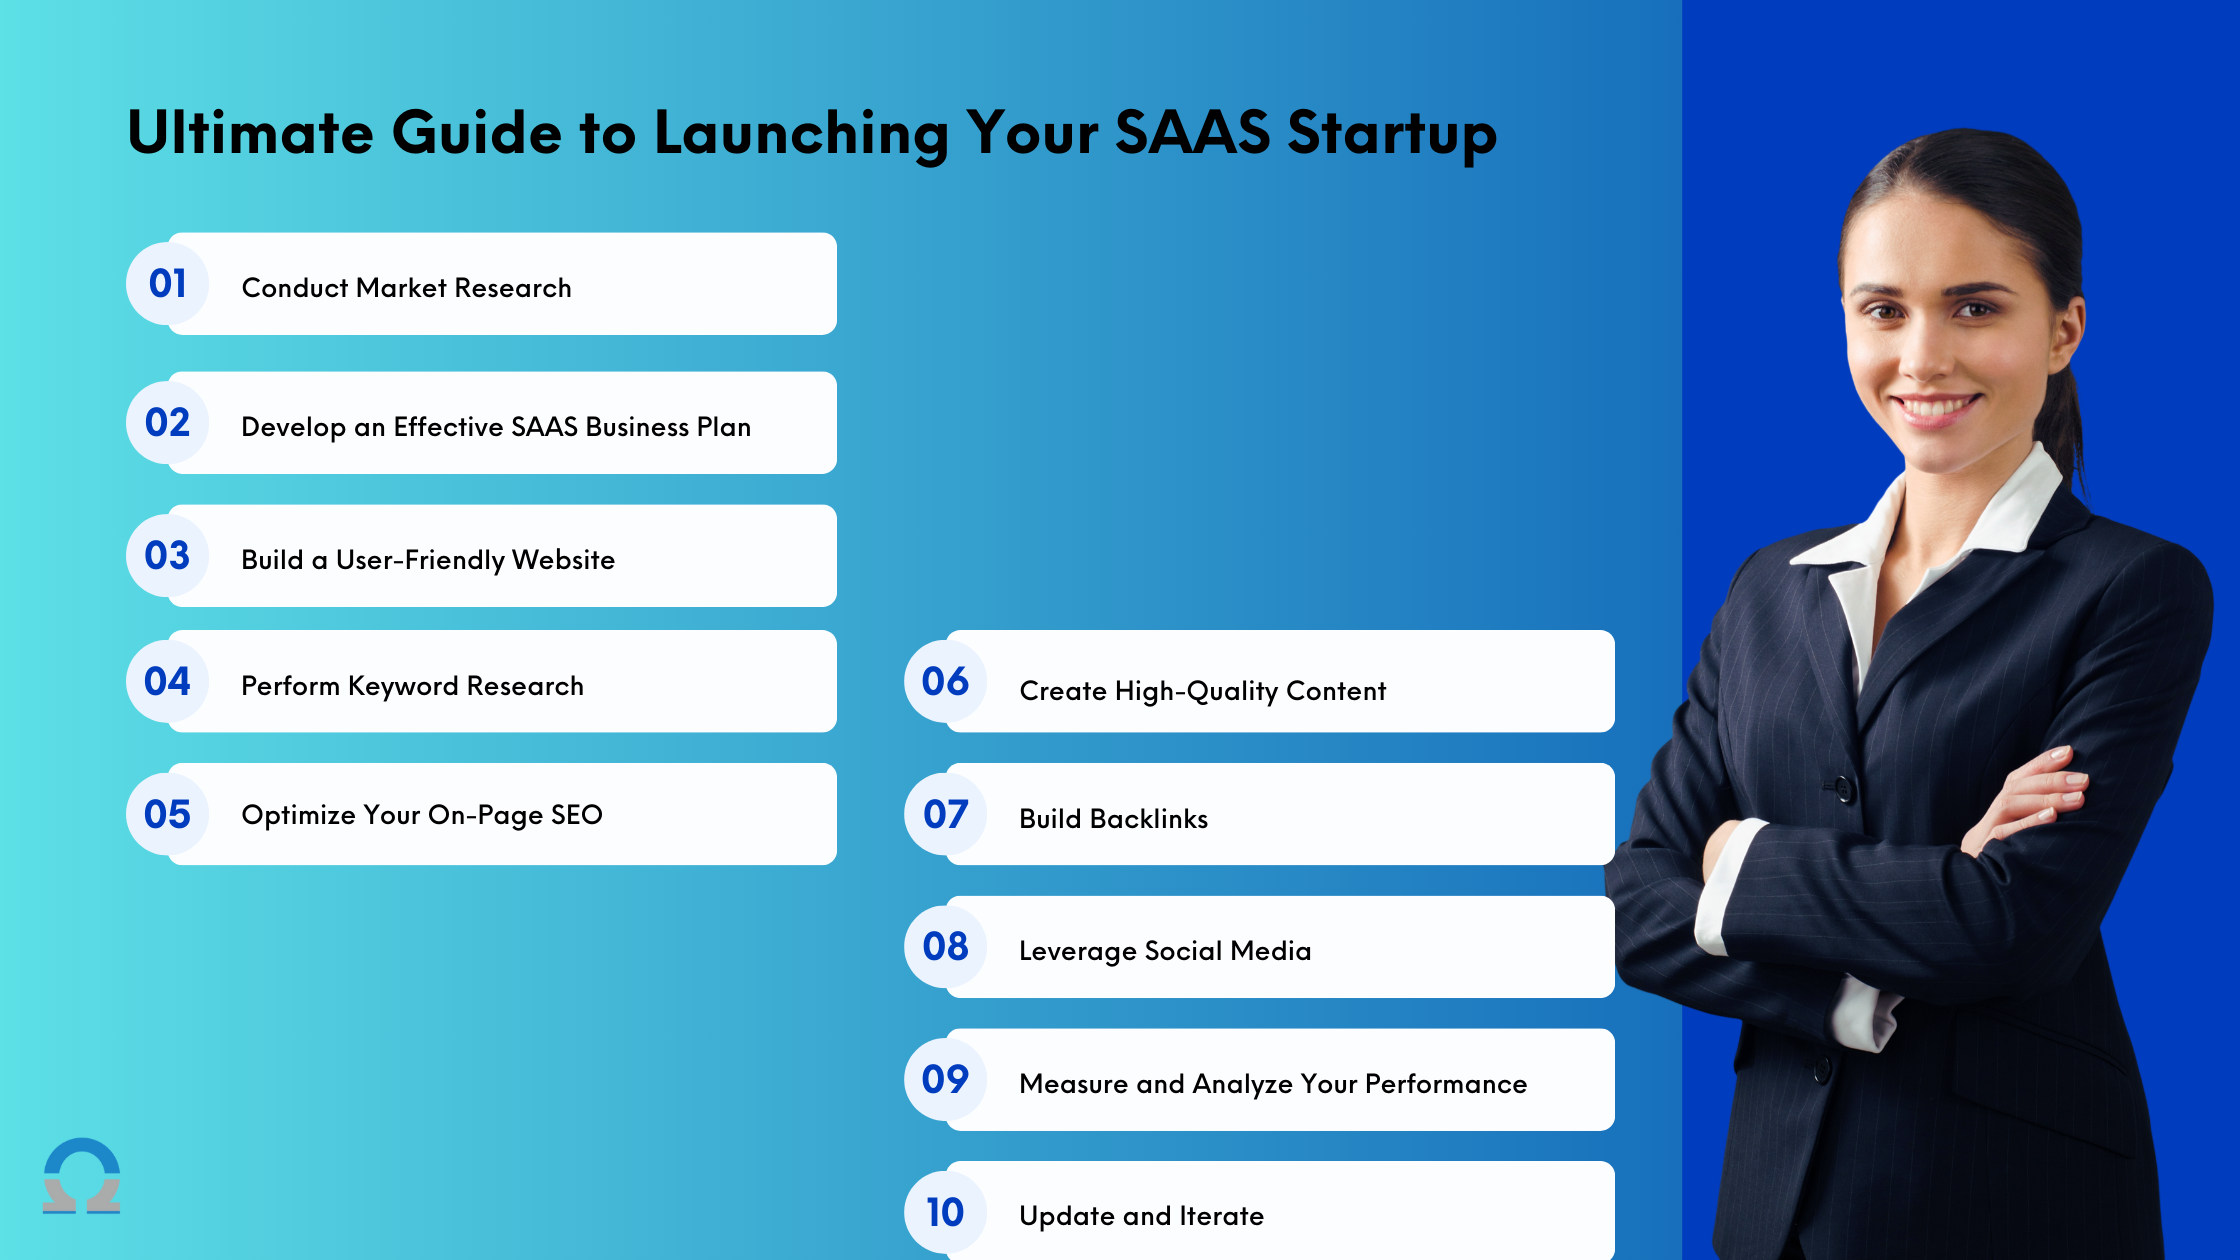 The Ultimate Guide to Launching Your SAAS Startup